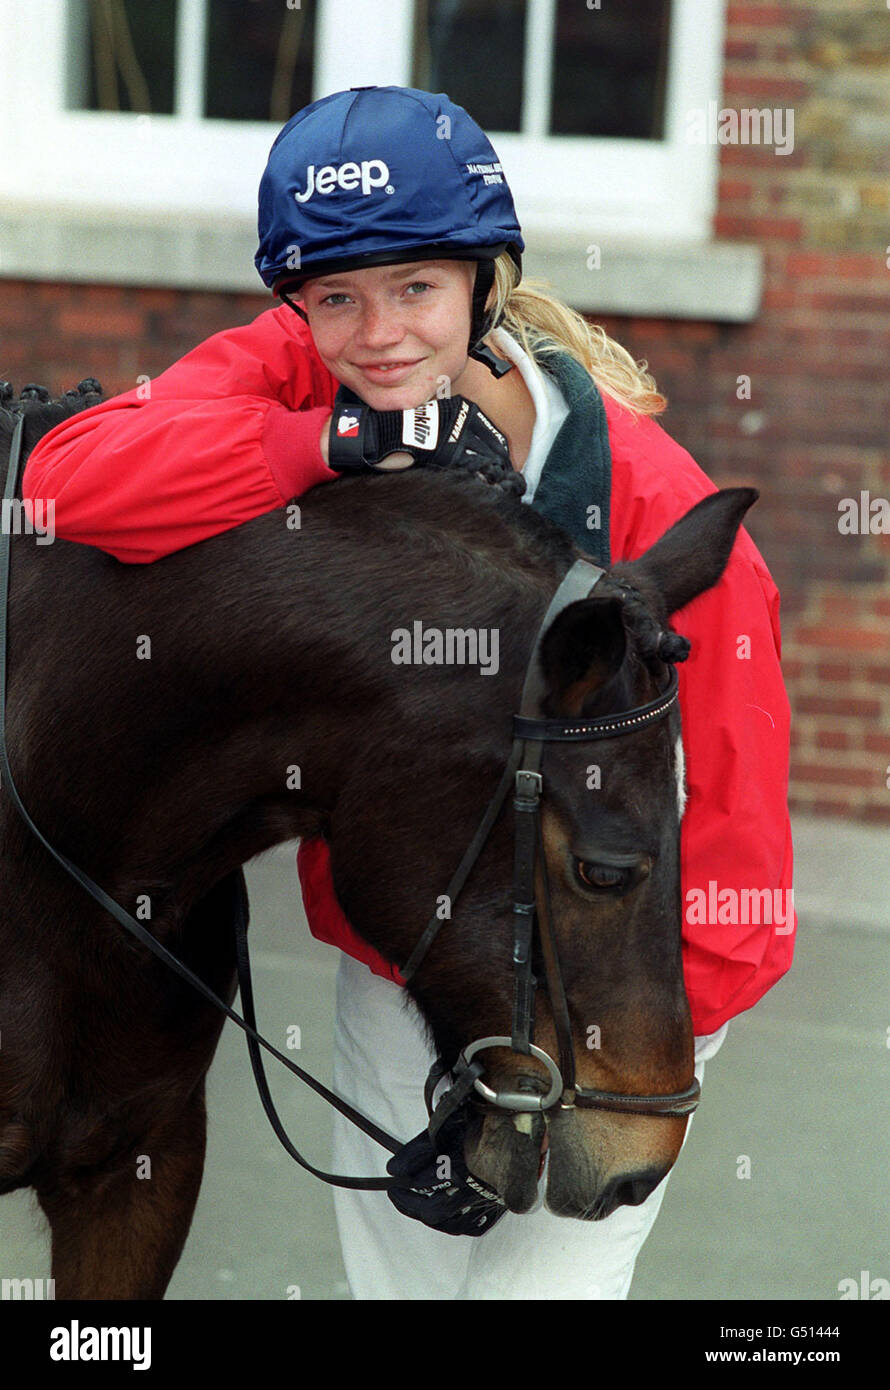 Supermodel Jodie Kidd helps to launch the National Riding Festival at Morningside Primary School, London. The annual event aims to promote the benefits of riding and encourage primary school children to 'Take up the Reins'. * an initiative taking the form of a roadshow during which a mechanical horse (shown) will be taken around sixty schools across the UK. Stock Photo